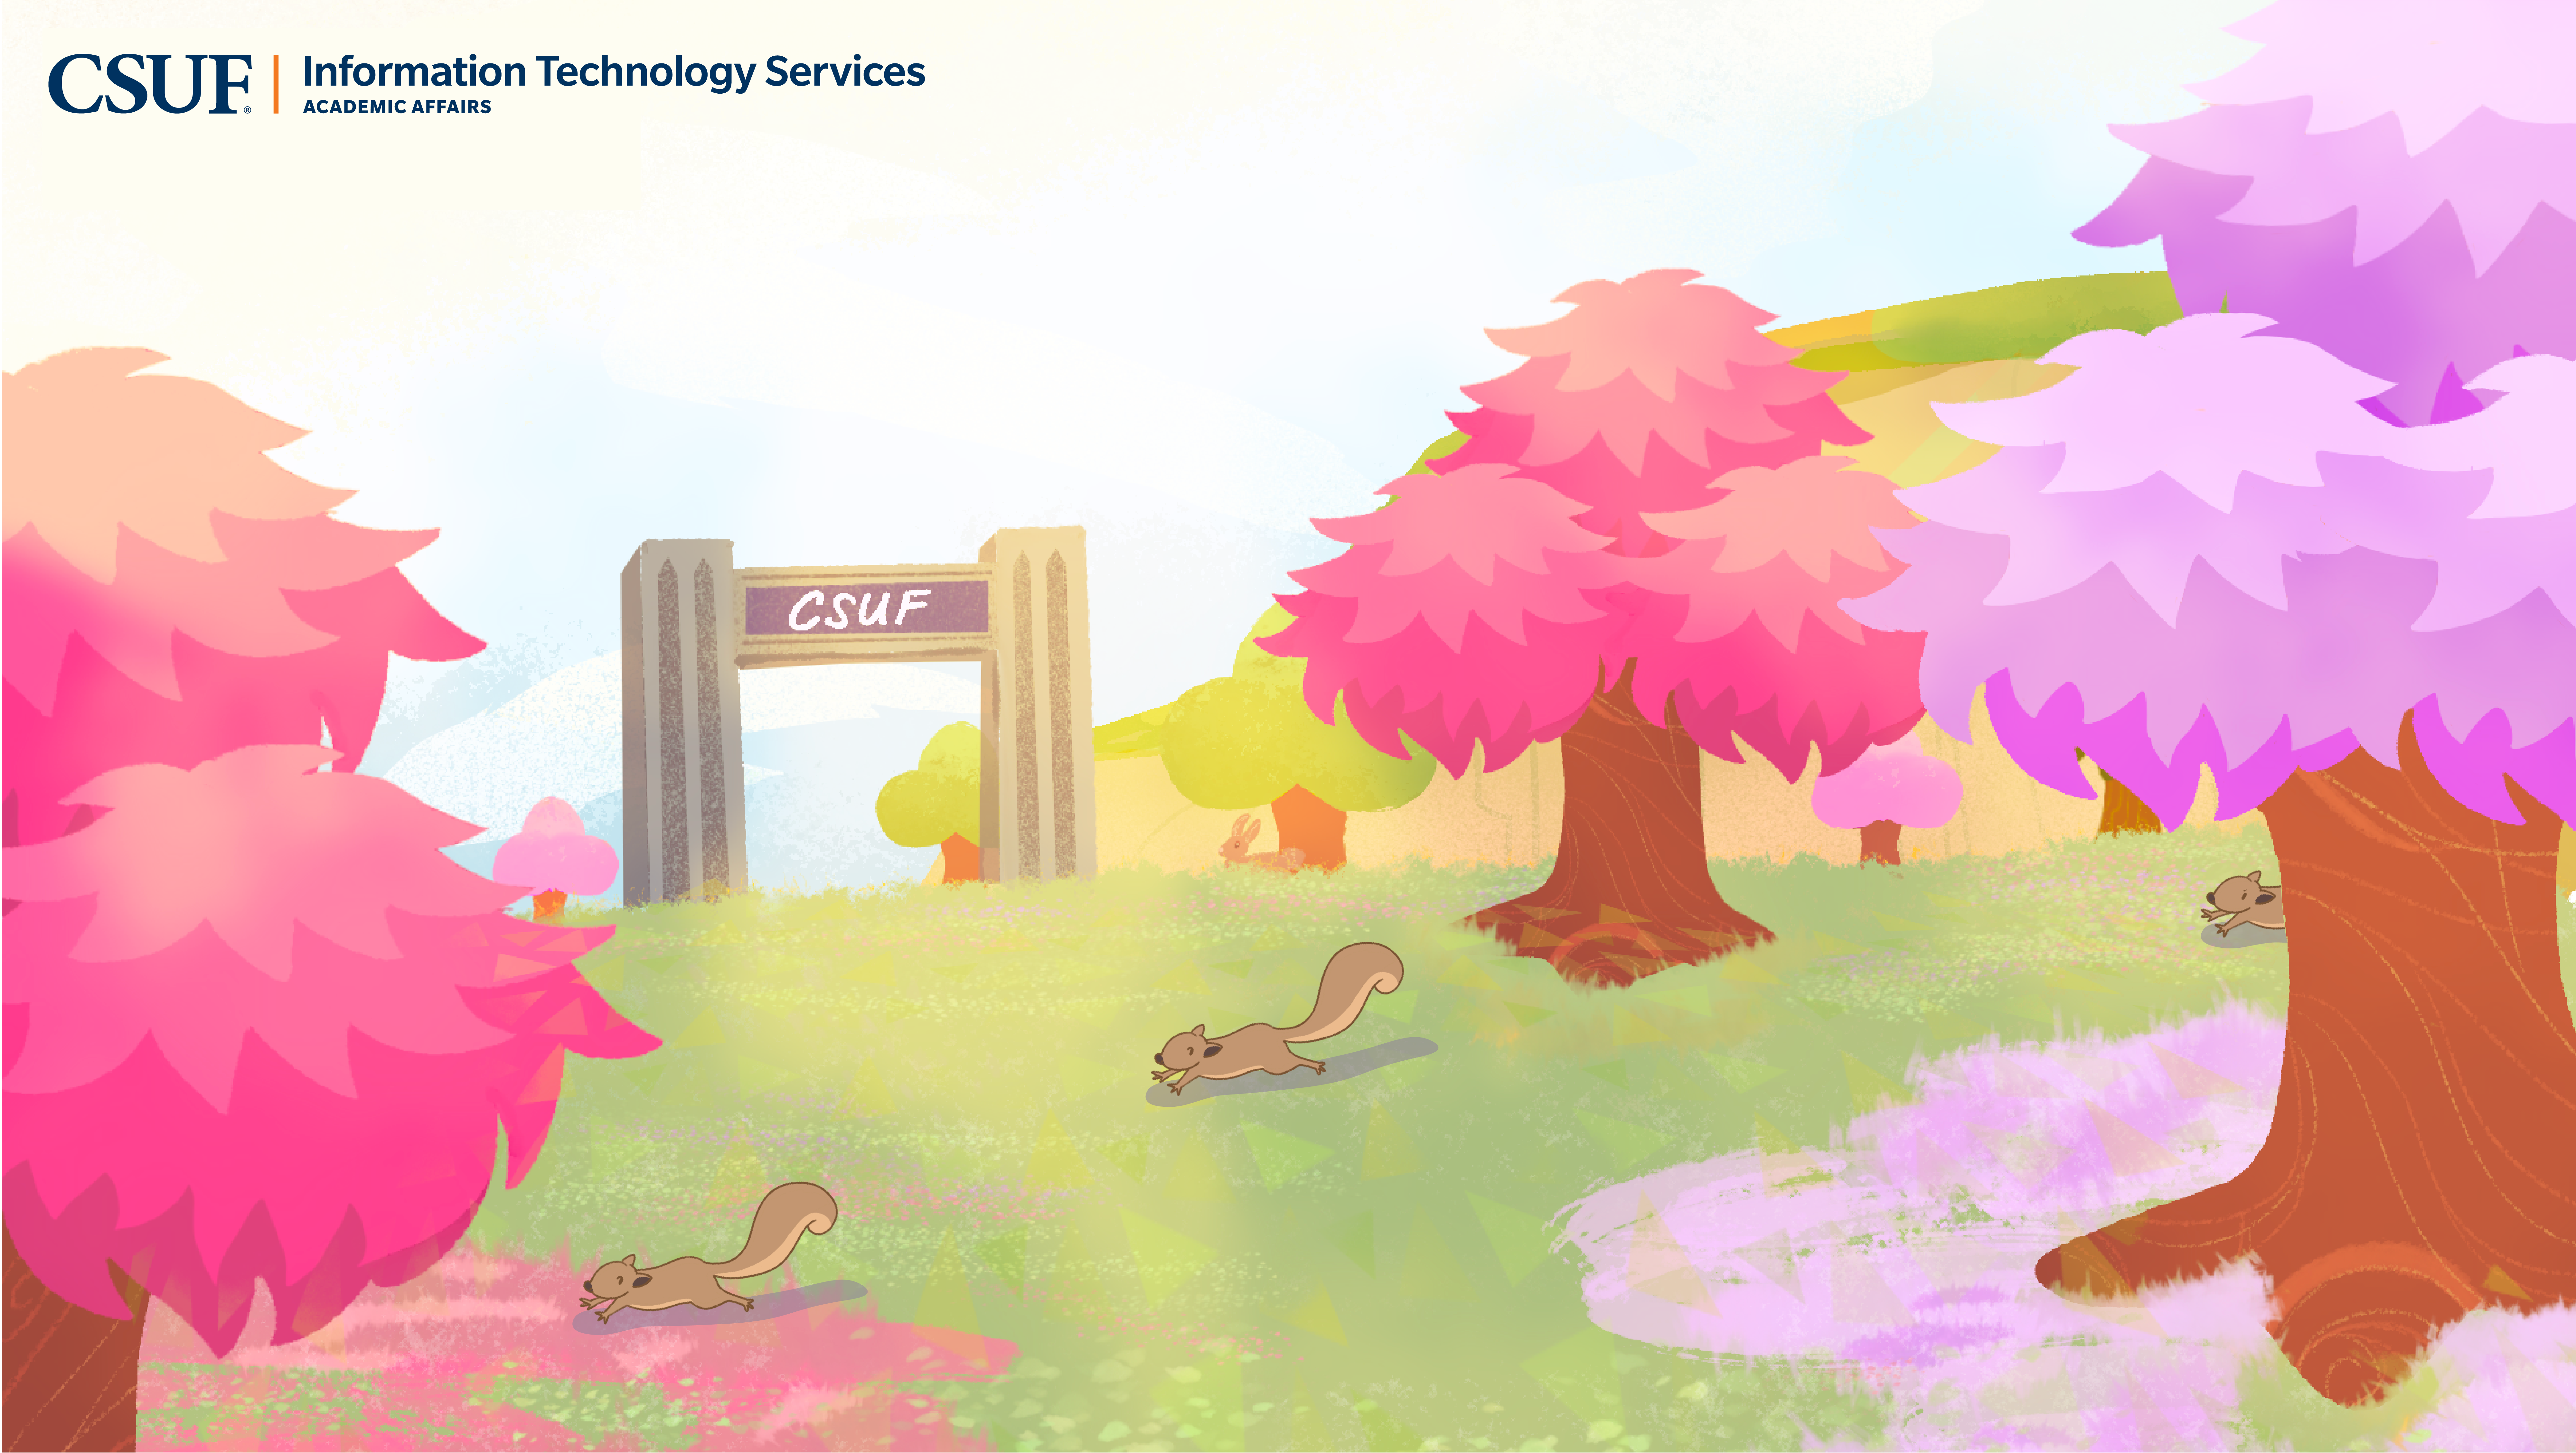 Dreamy meadow with pink, purple and green trees with a concrete arch that says CSUF